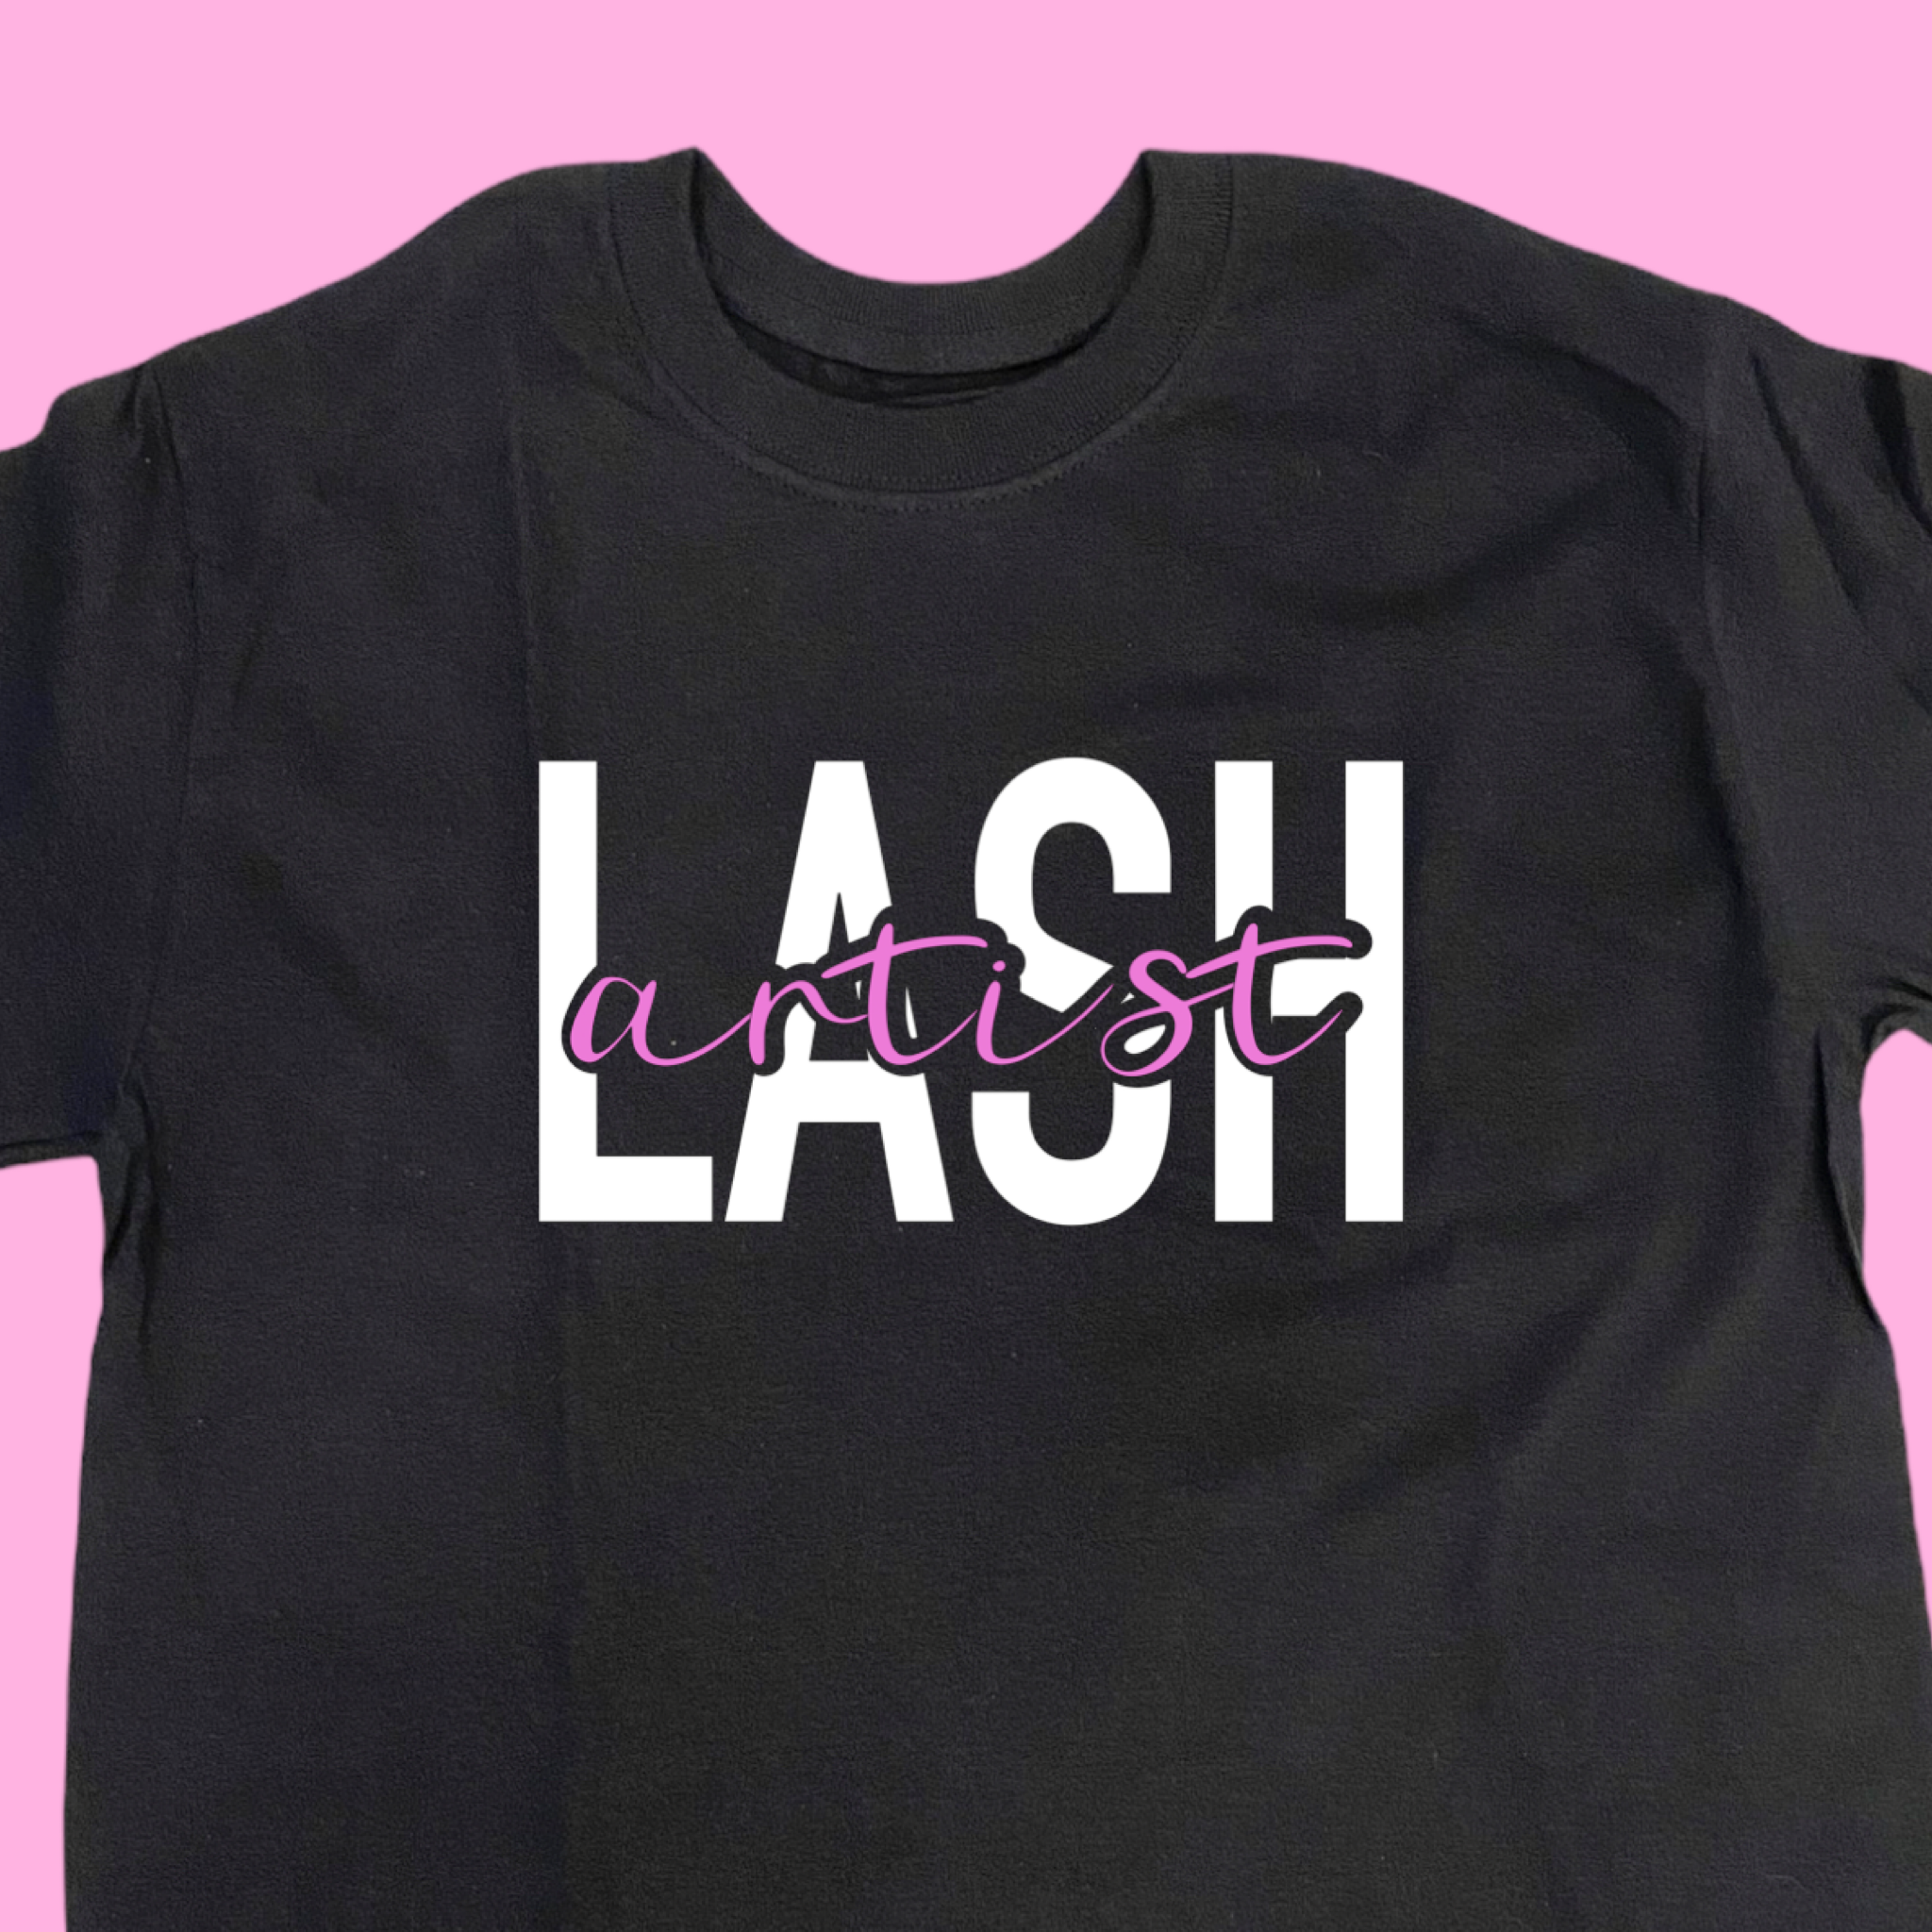 T-SHIRT - LASH ARTIST ( relaxed fit )